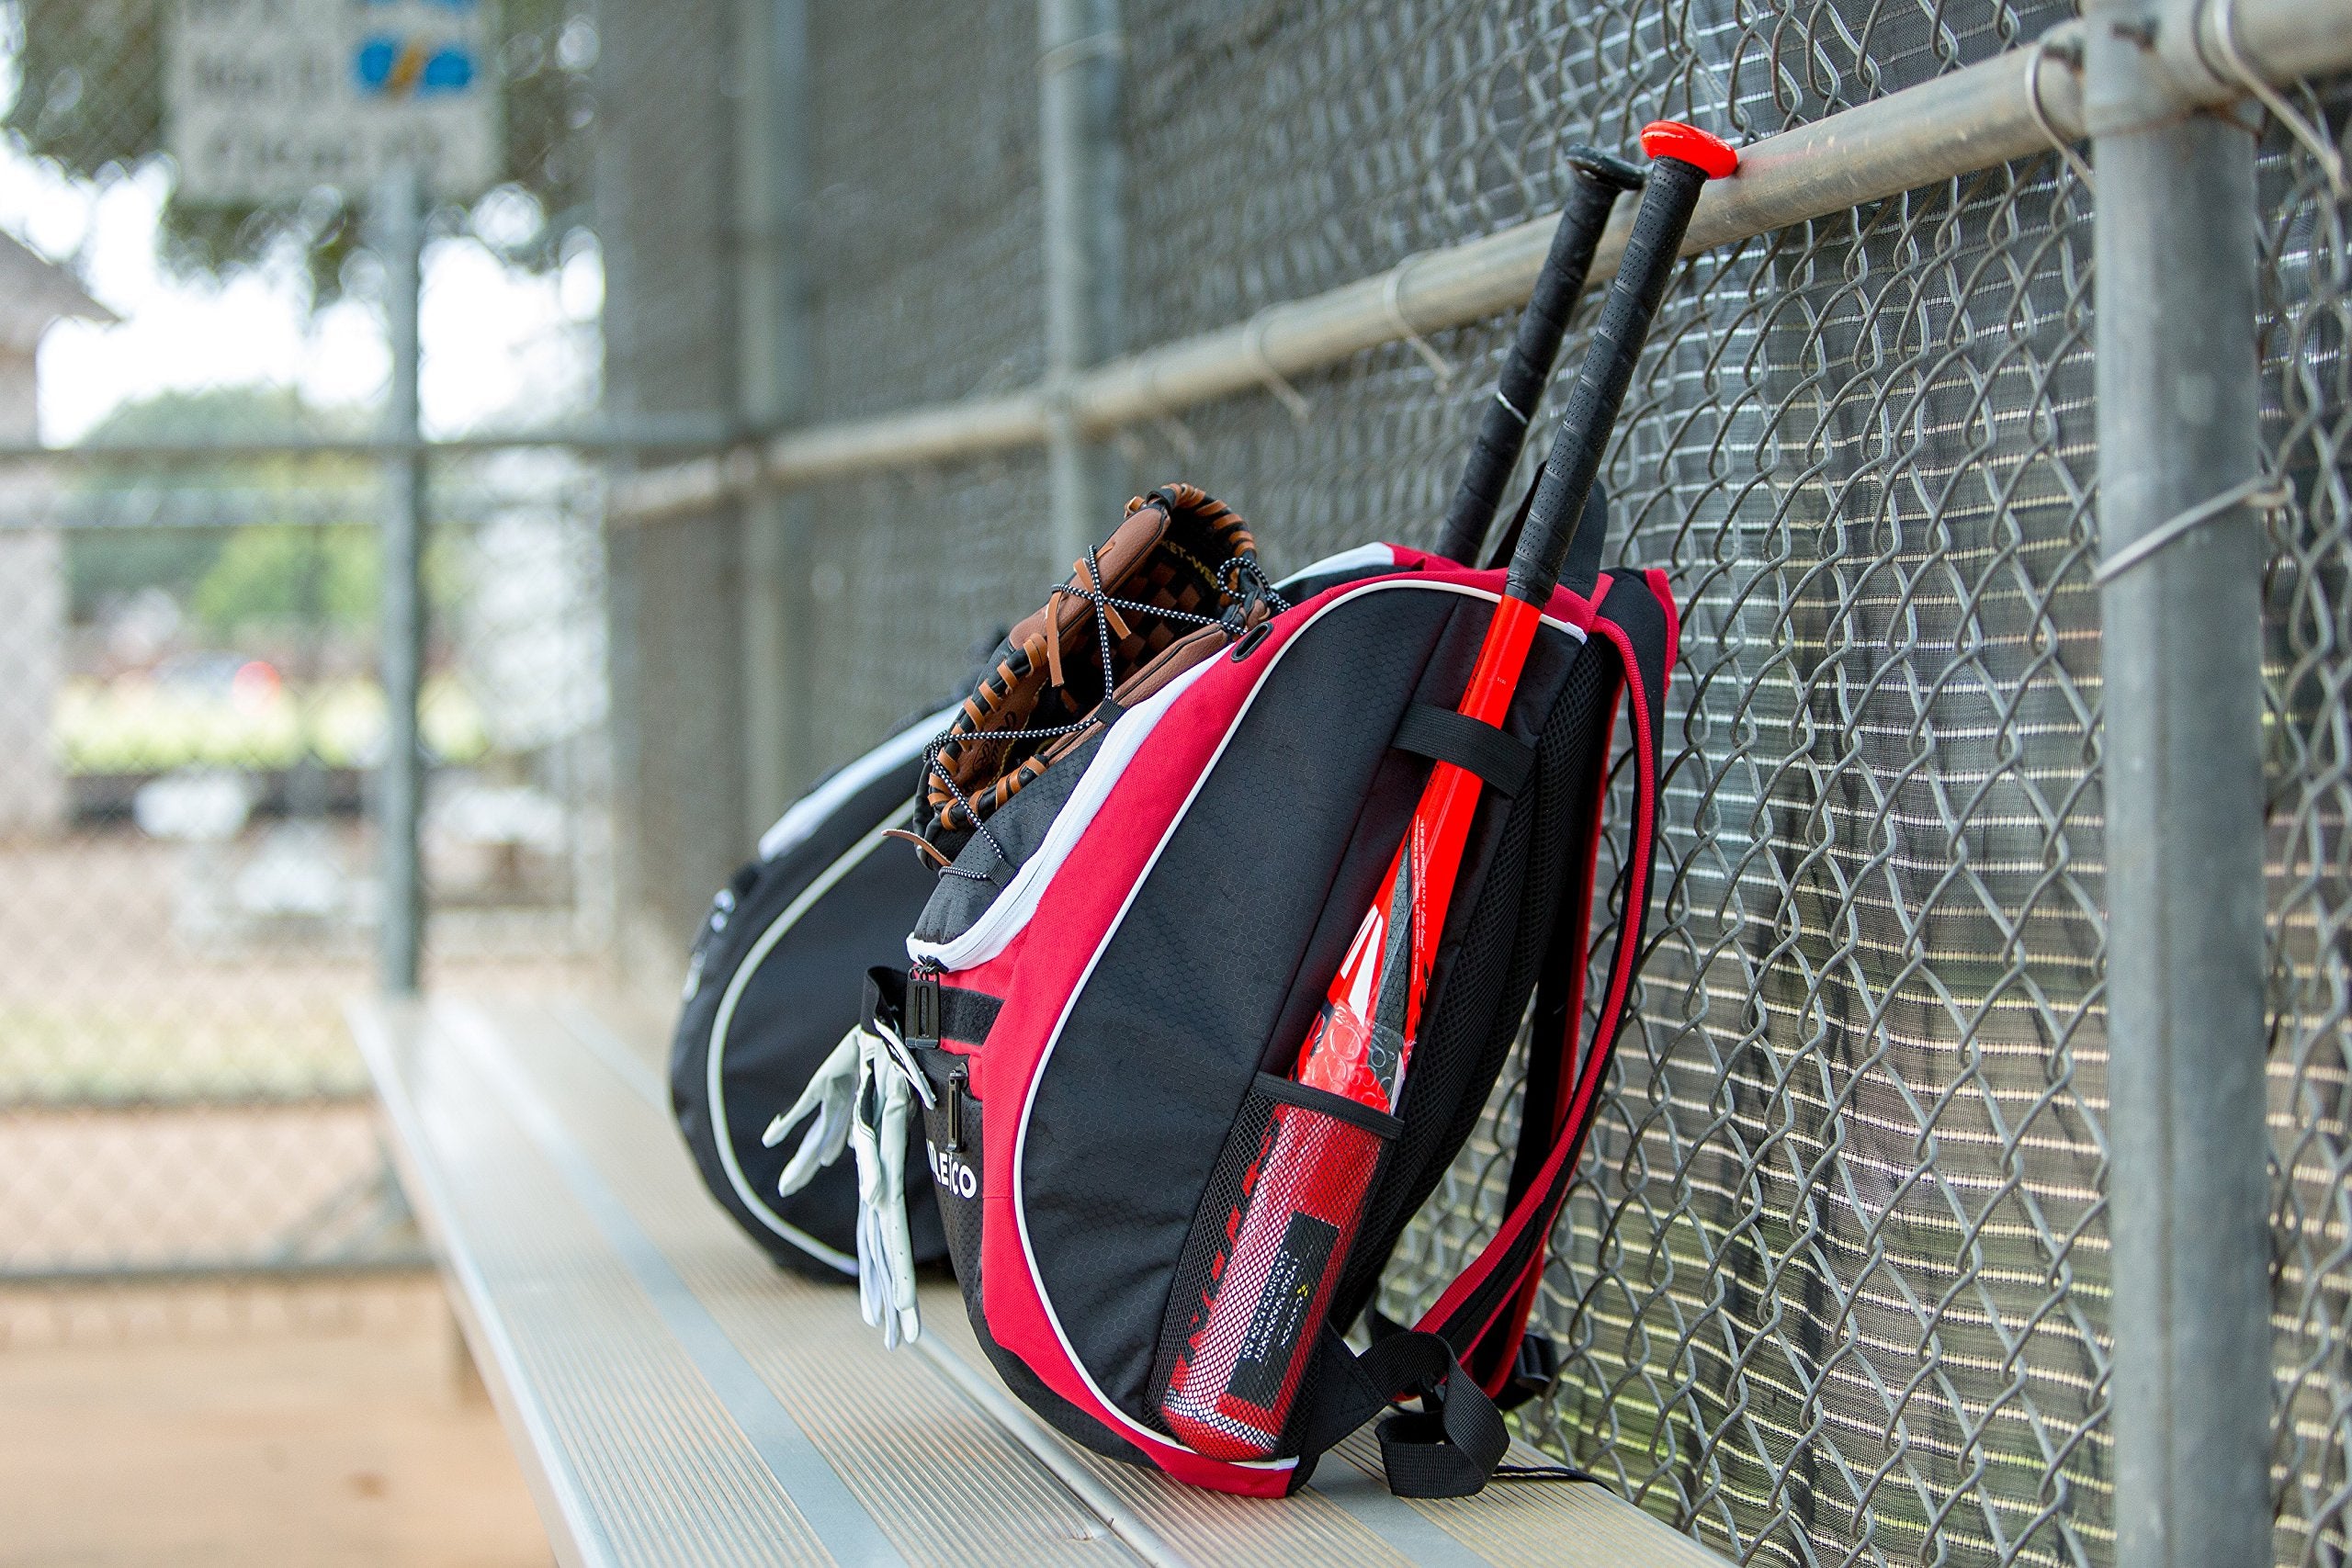 Athletico Baseball Bat Bag - Backpack for Baseball, T-Ball & Softball Equipment & Gear for Youth and Adults | Holds Bat, Helmet, Glove, & Shoes |Shoe Compartment & Fence Hook  - Good